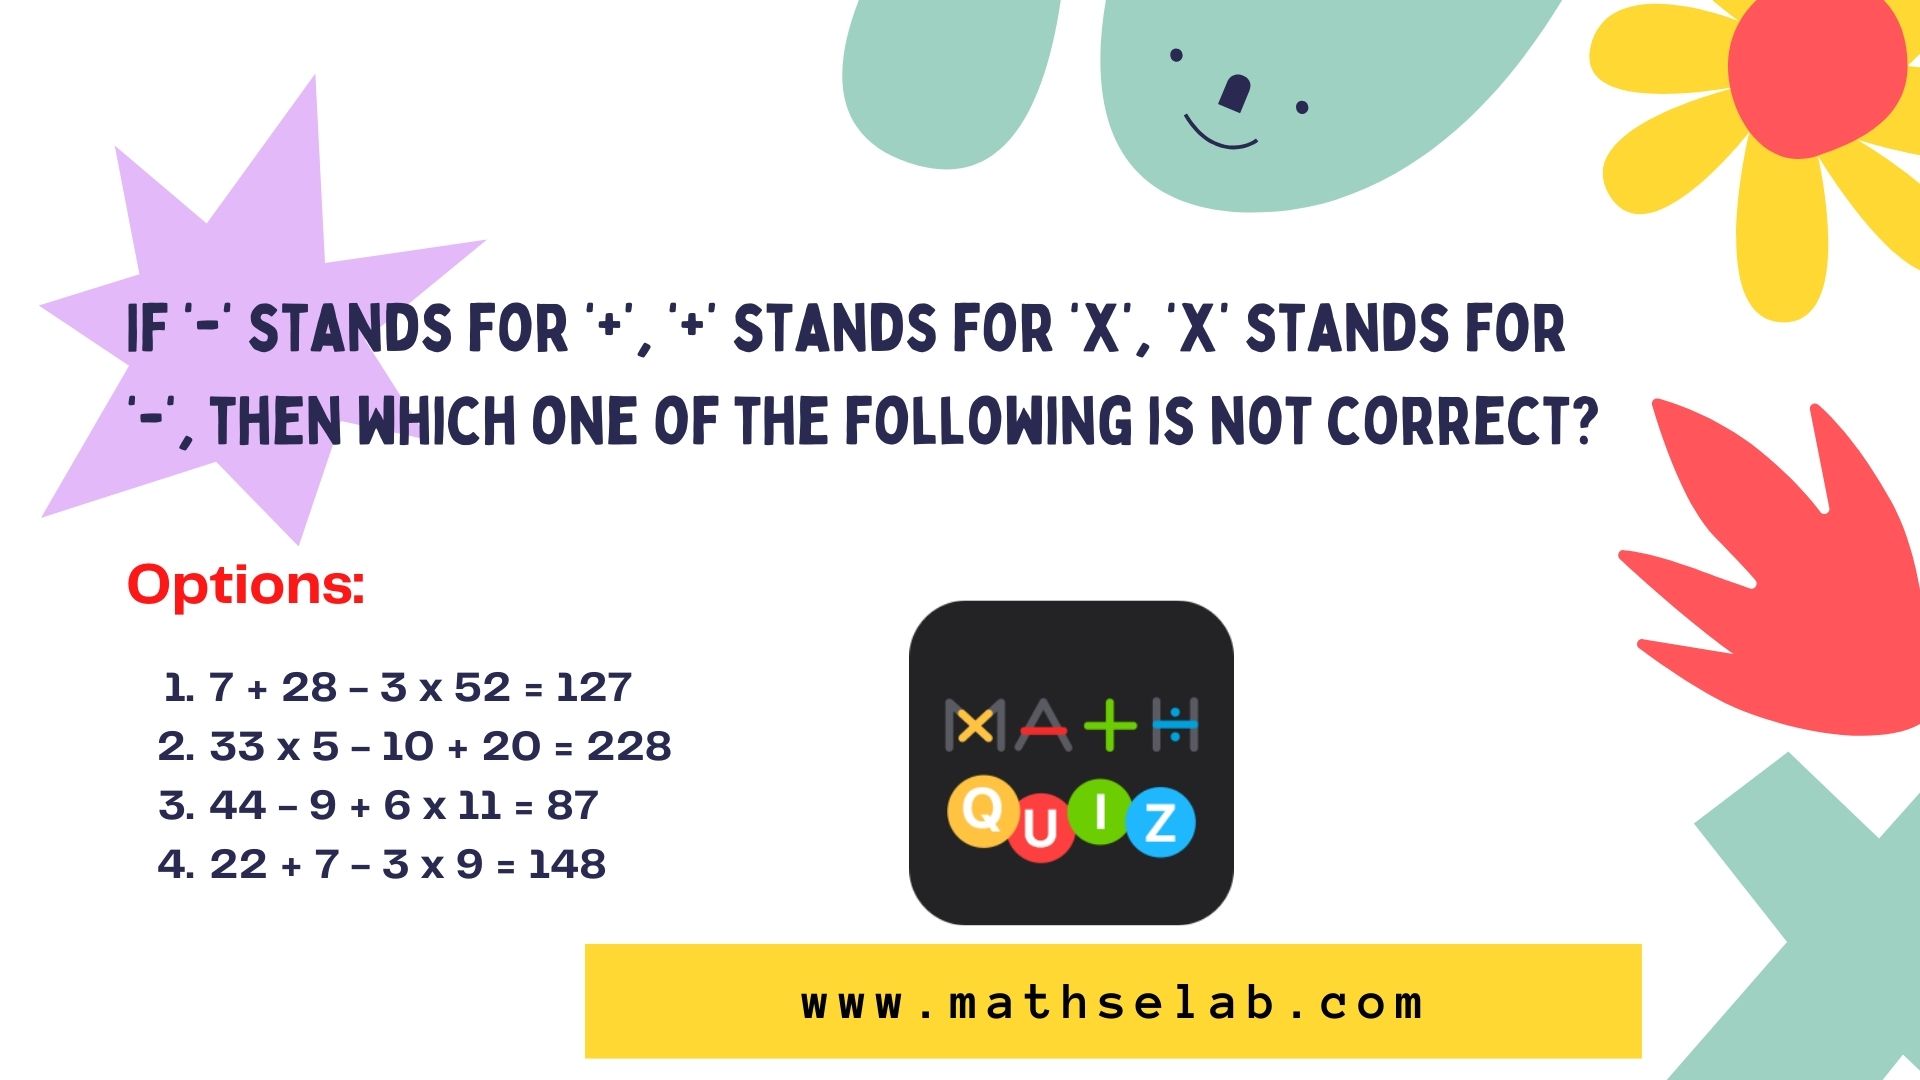 If ‘-‘ stands for ‘+’, ‘+’ stands for ‘x’, ‘x’ stands for ‘-‘, then which one of the following is not correct – mathselab.com